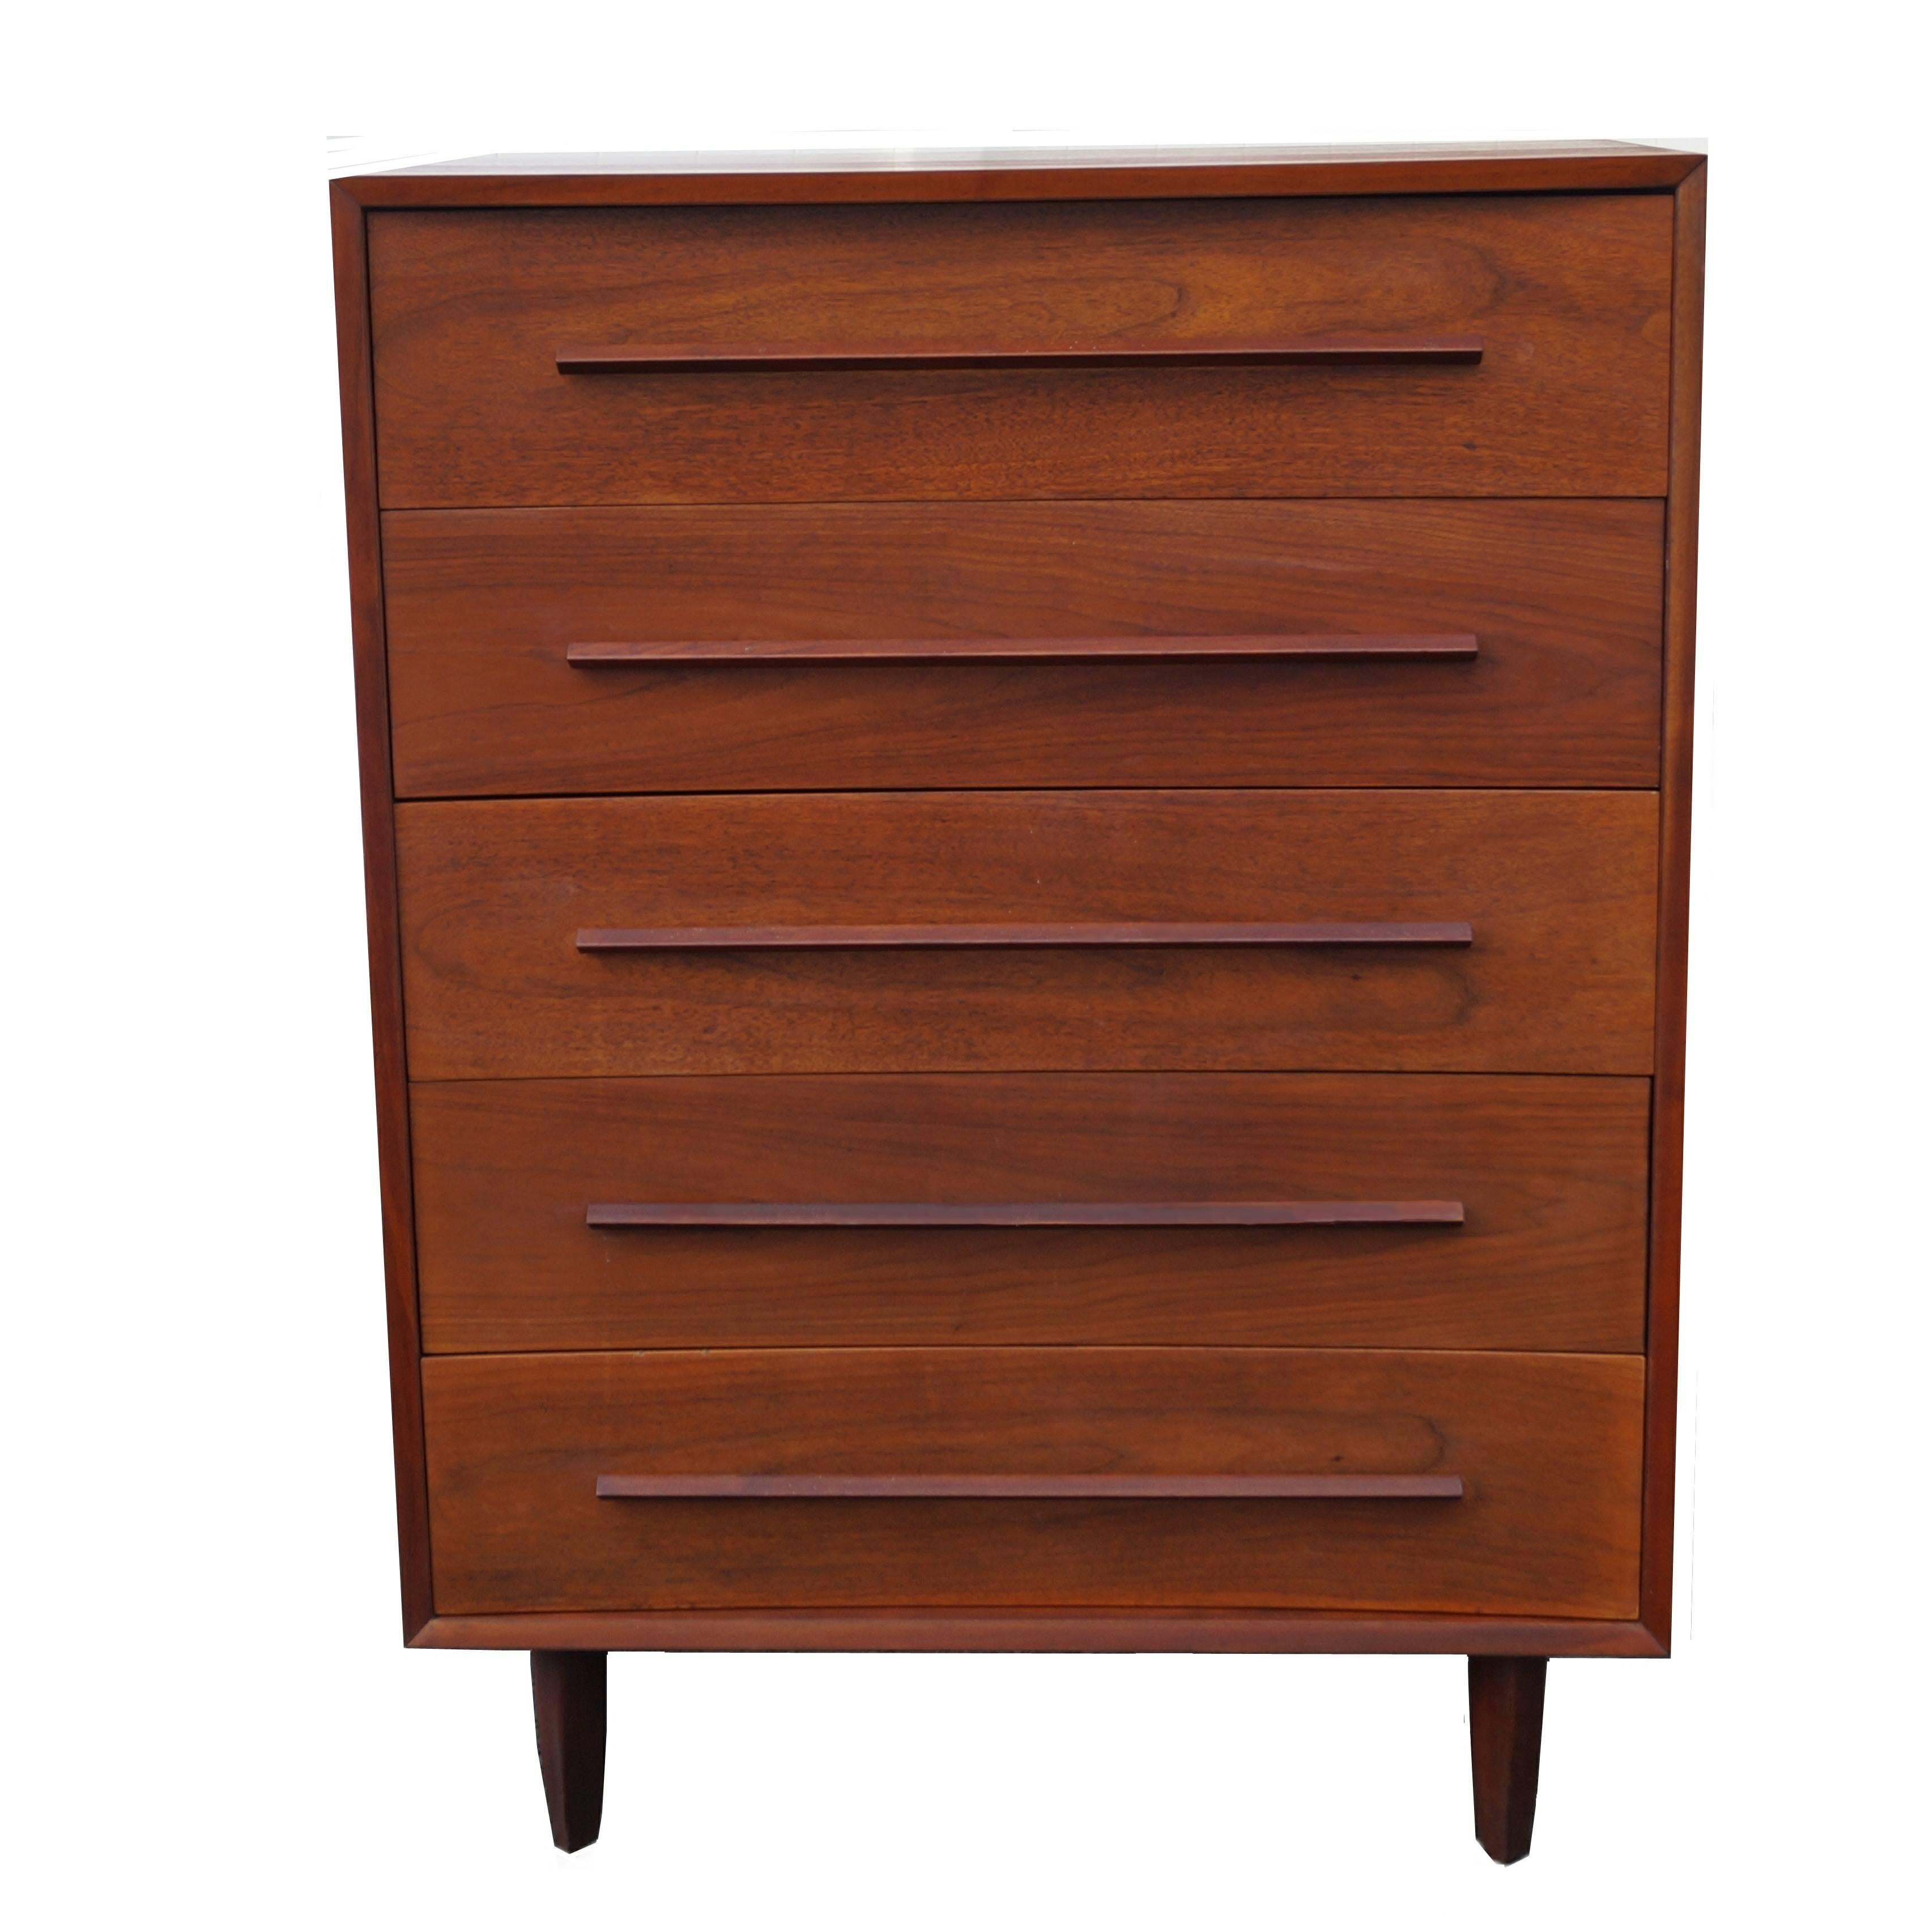 Widdicomb sculpted highboy chest of drawers dresser manner of George Nakashima.